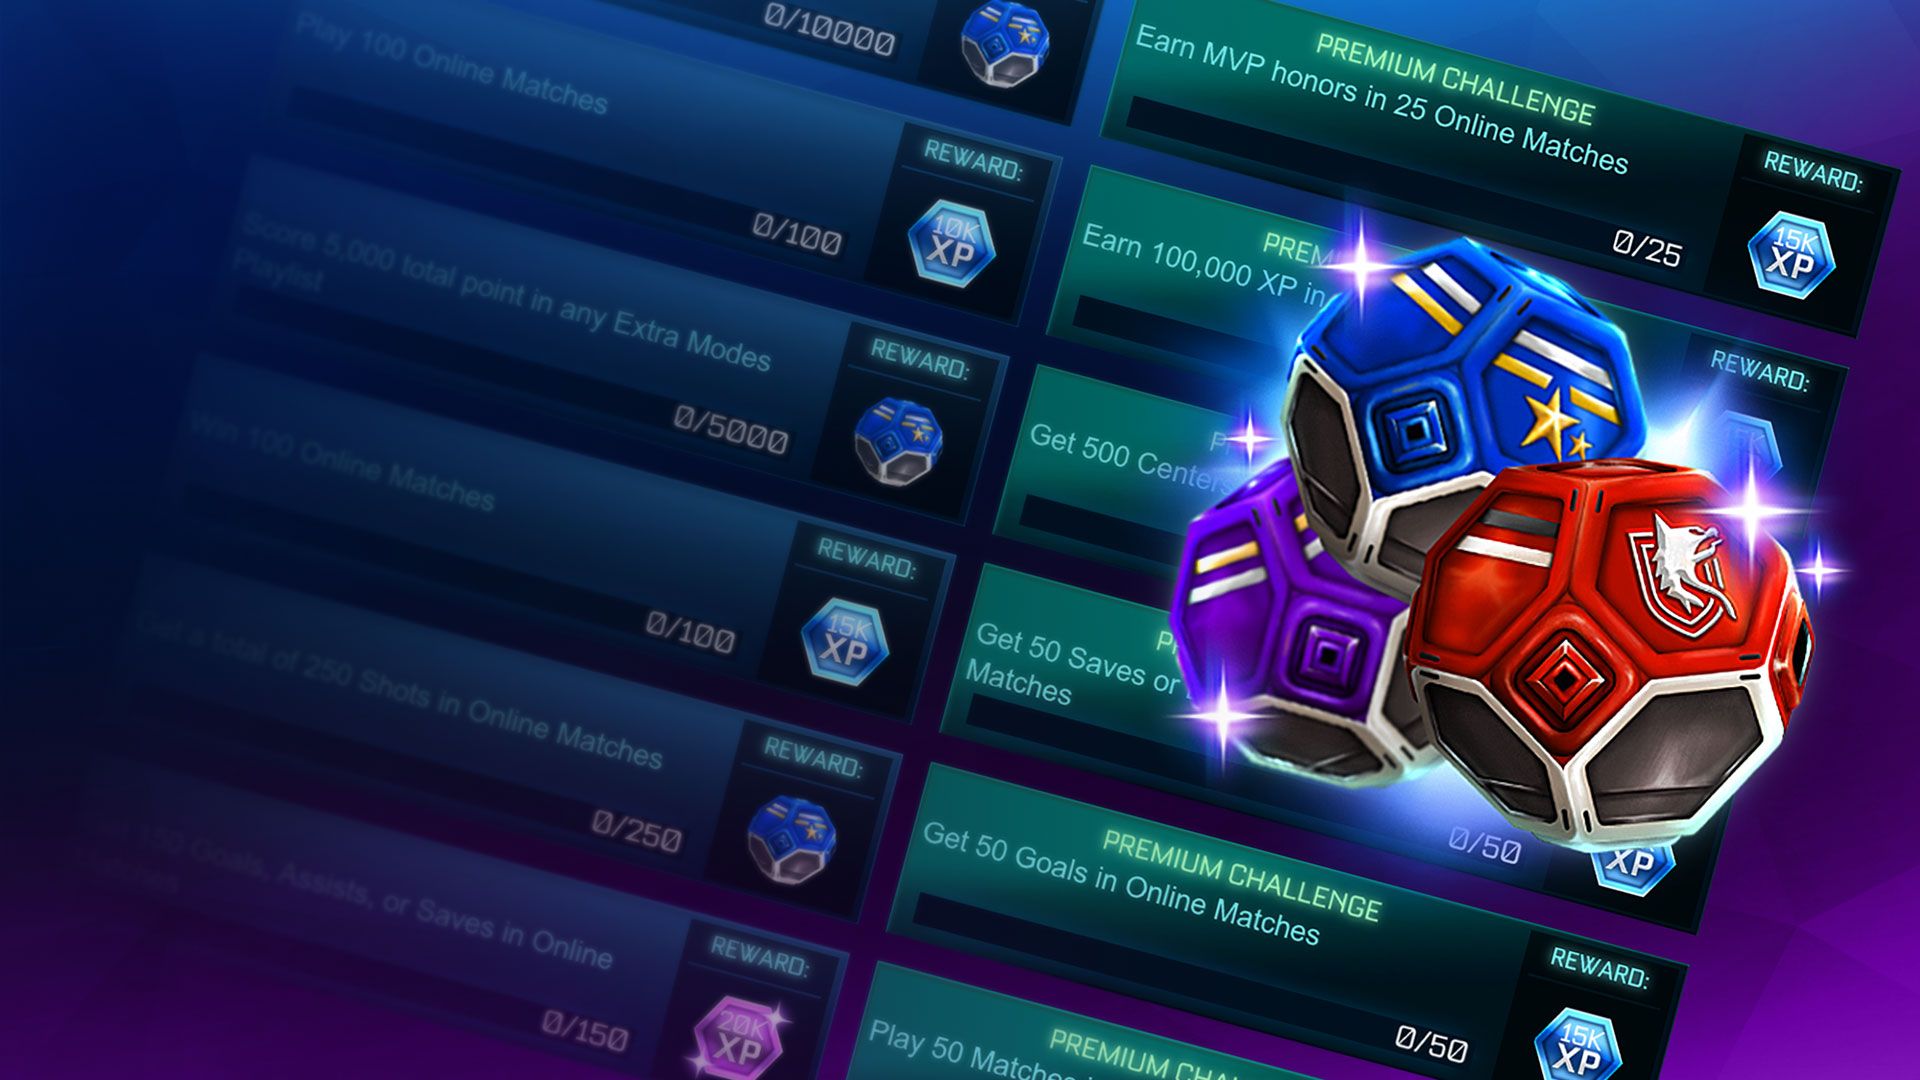 Rocket League League is updating its Challenge system in a big way with free to play. Check out our latest blog to see how you'll complete Challenges and what